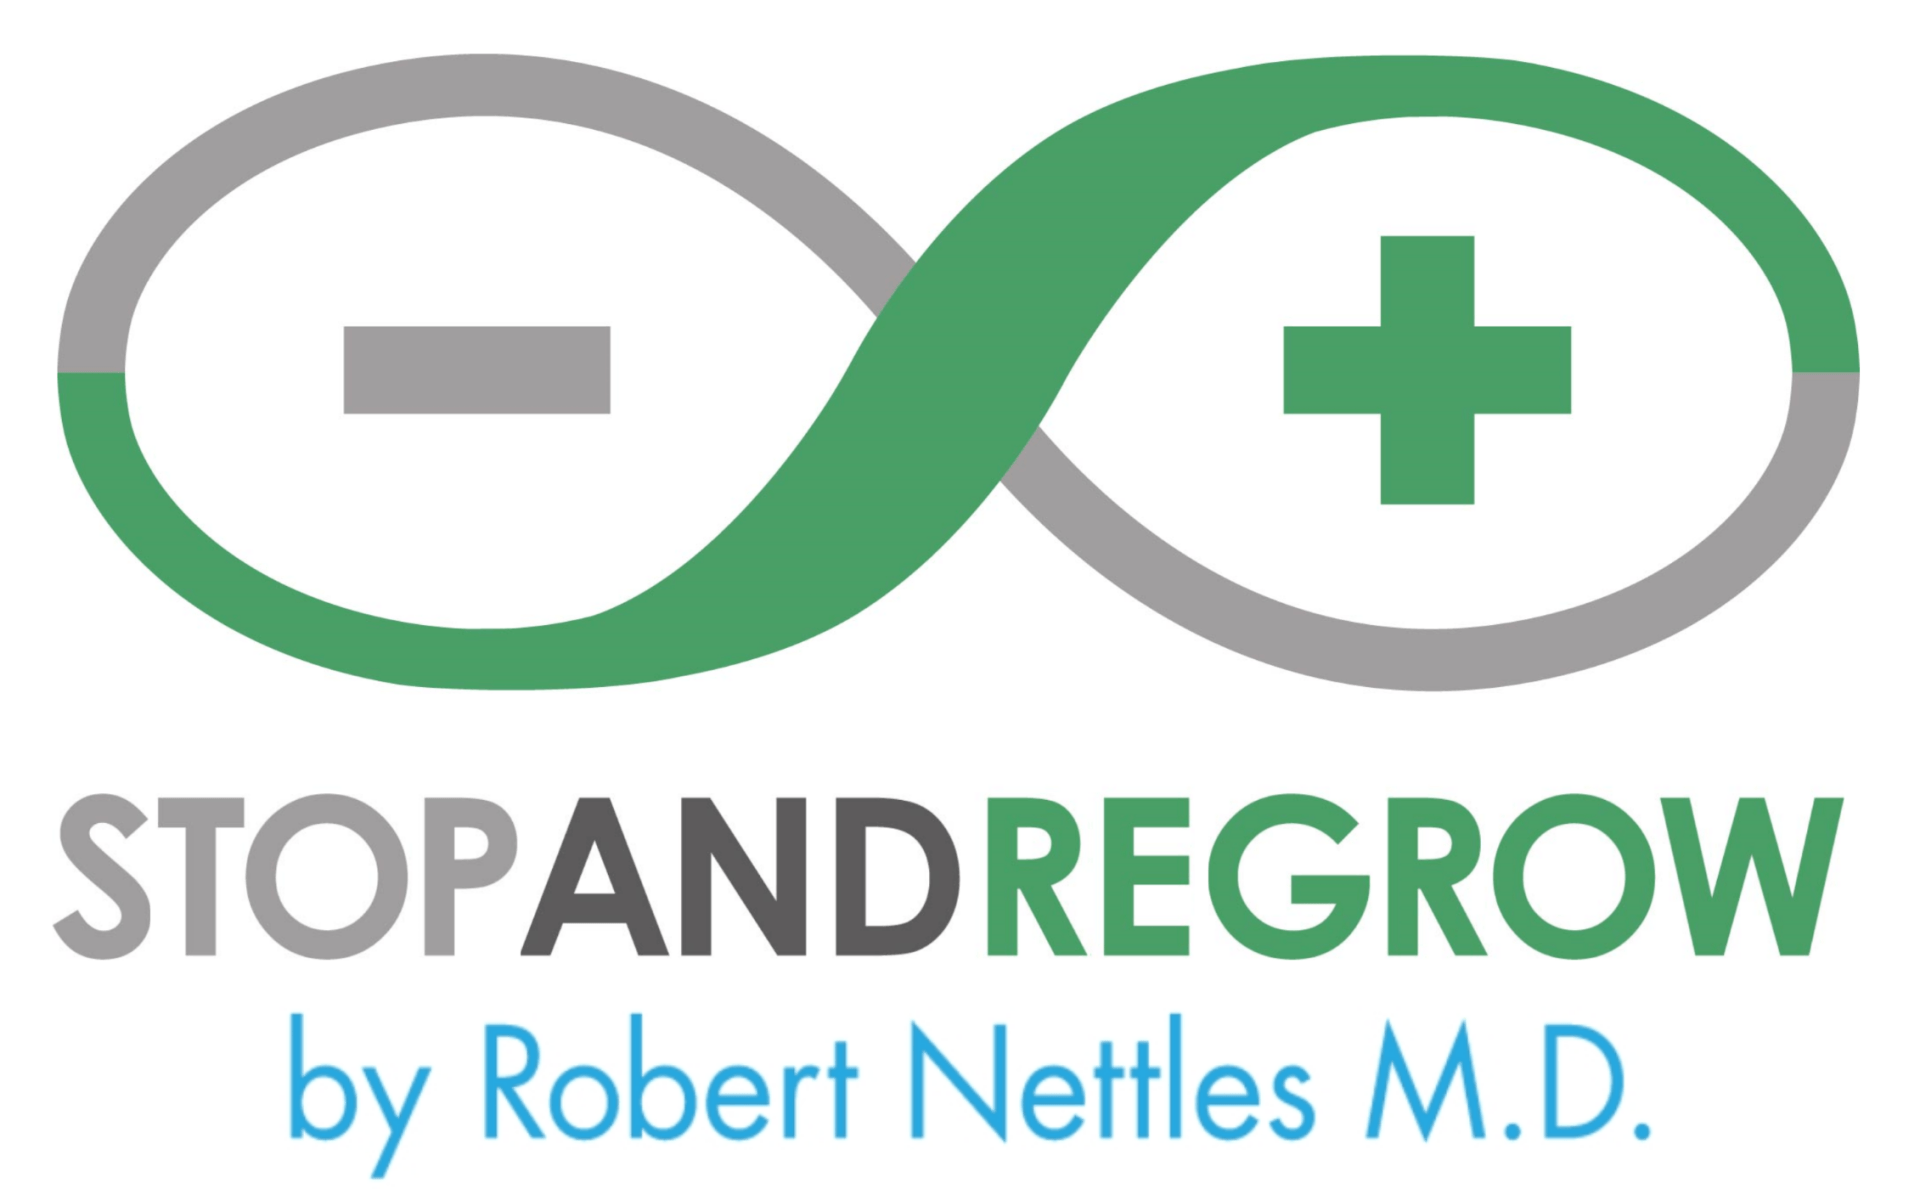 Stop and Regrow Hair Regrowth program by Robert Nettles MD